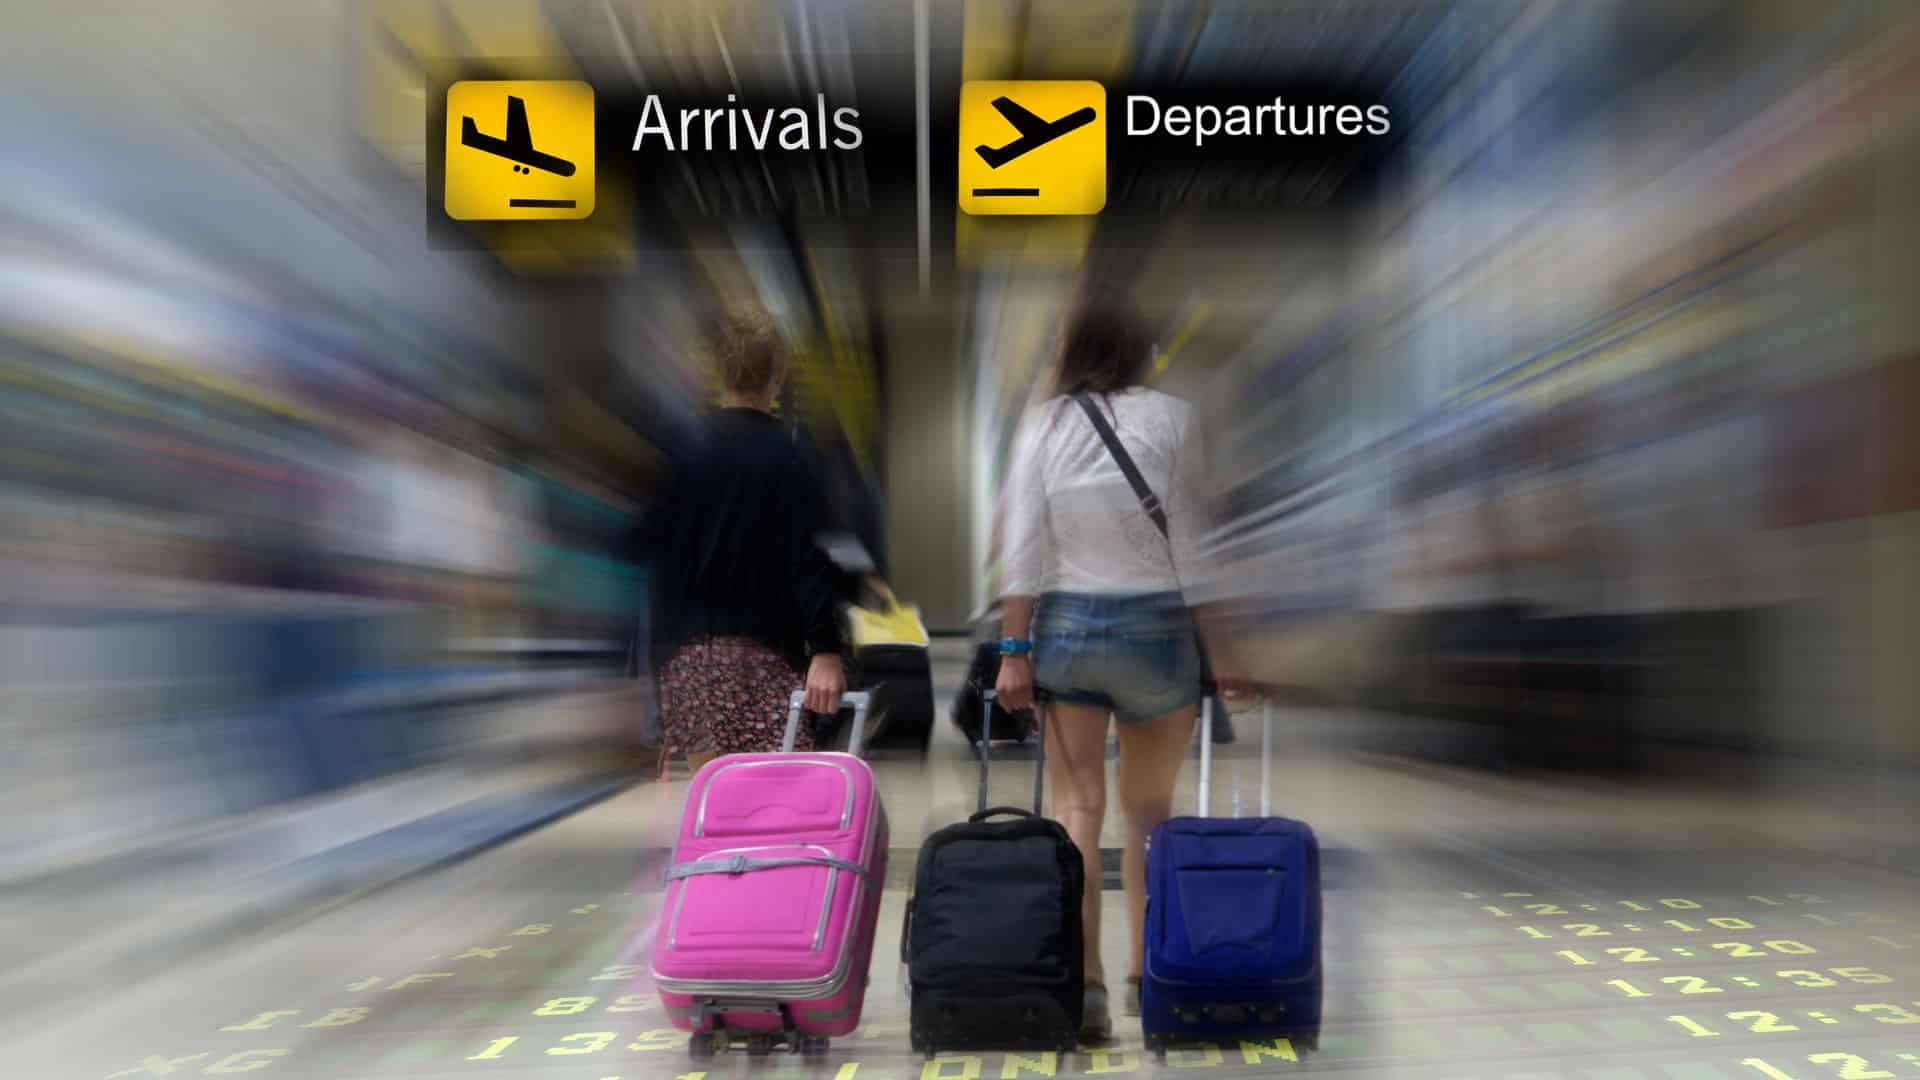 A motion shot of two women holding luggage standing in front of airport signs.